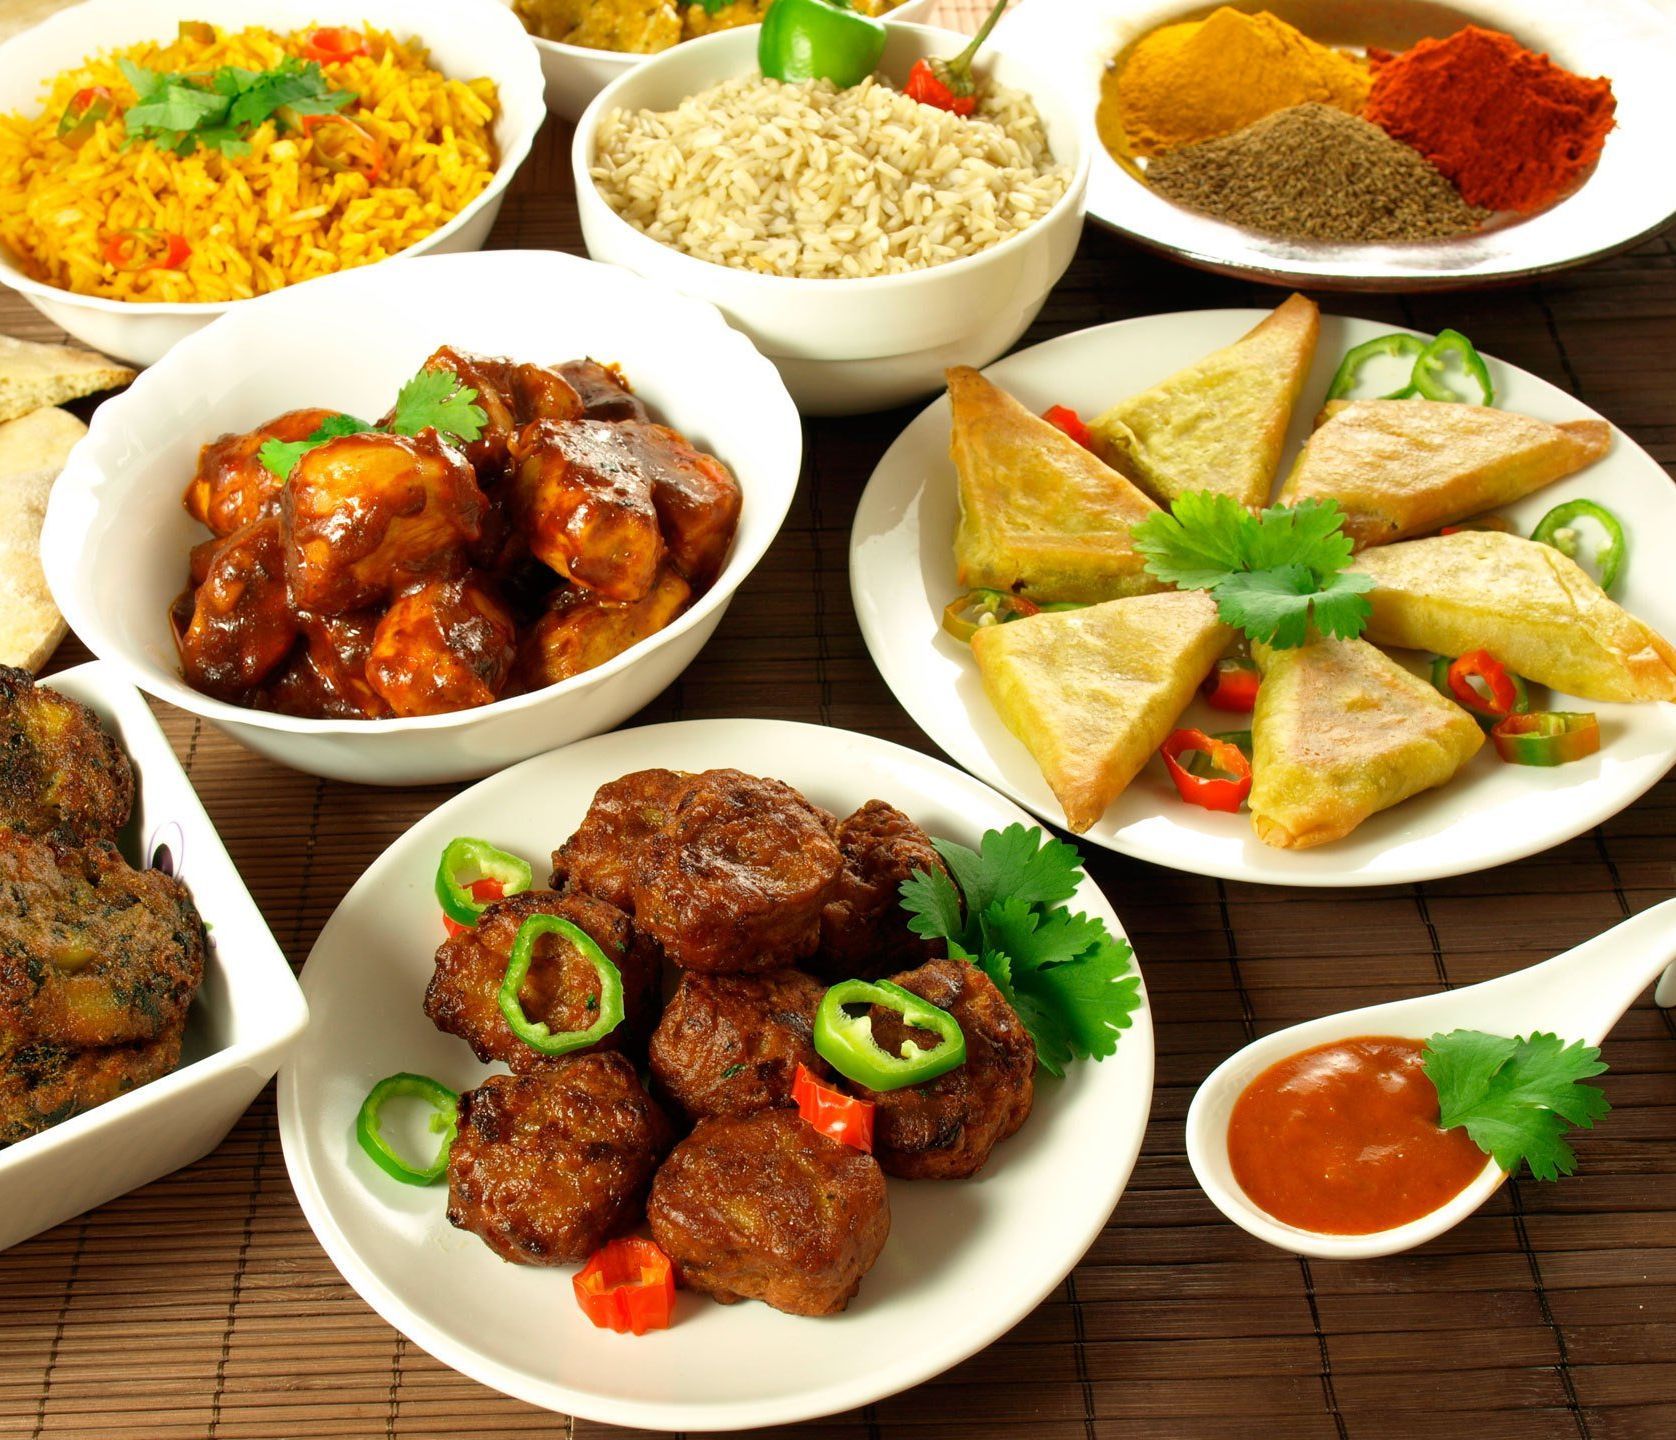 Selection of Indian Food Catering Dishes in Buffalo, NY